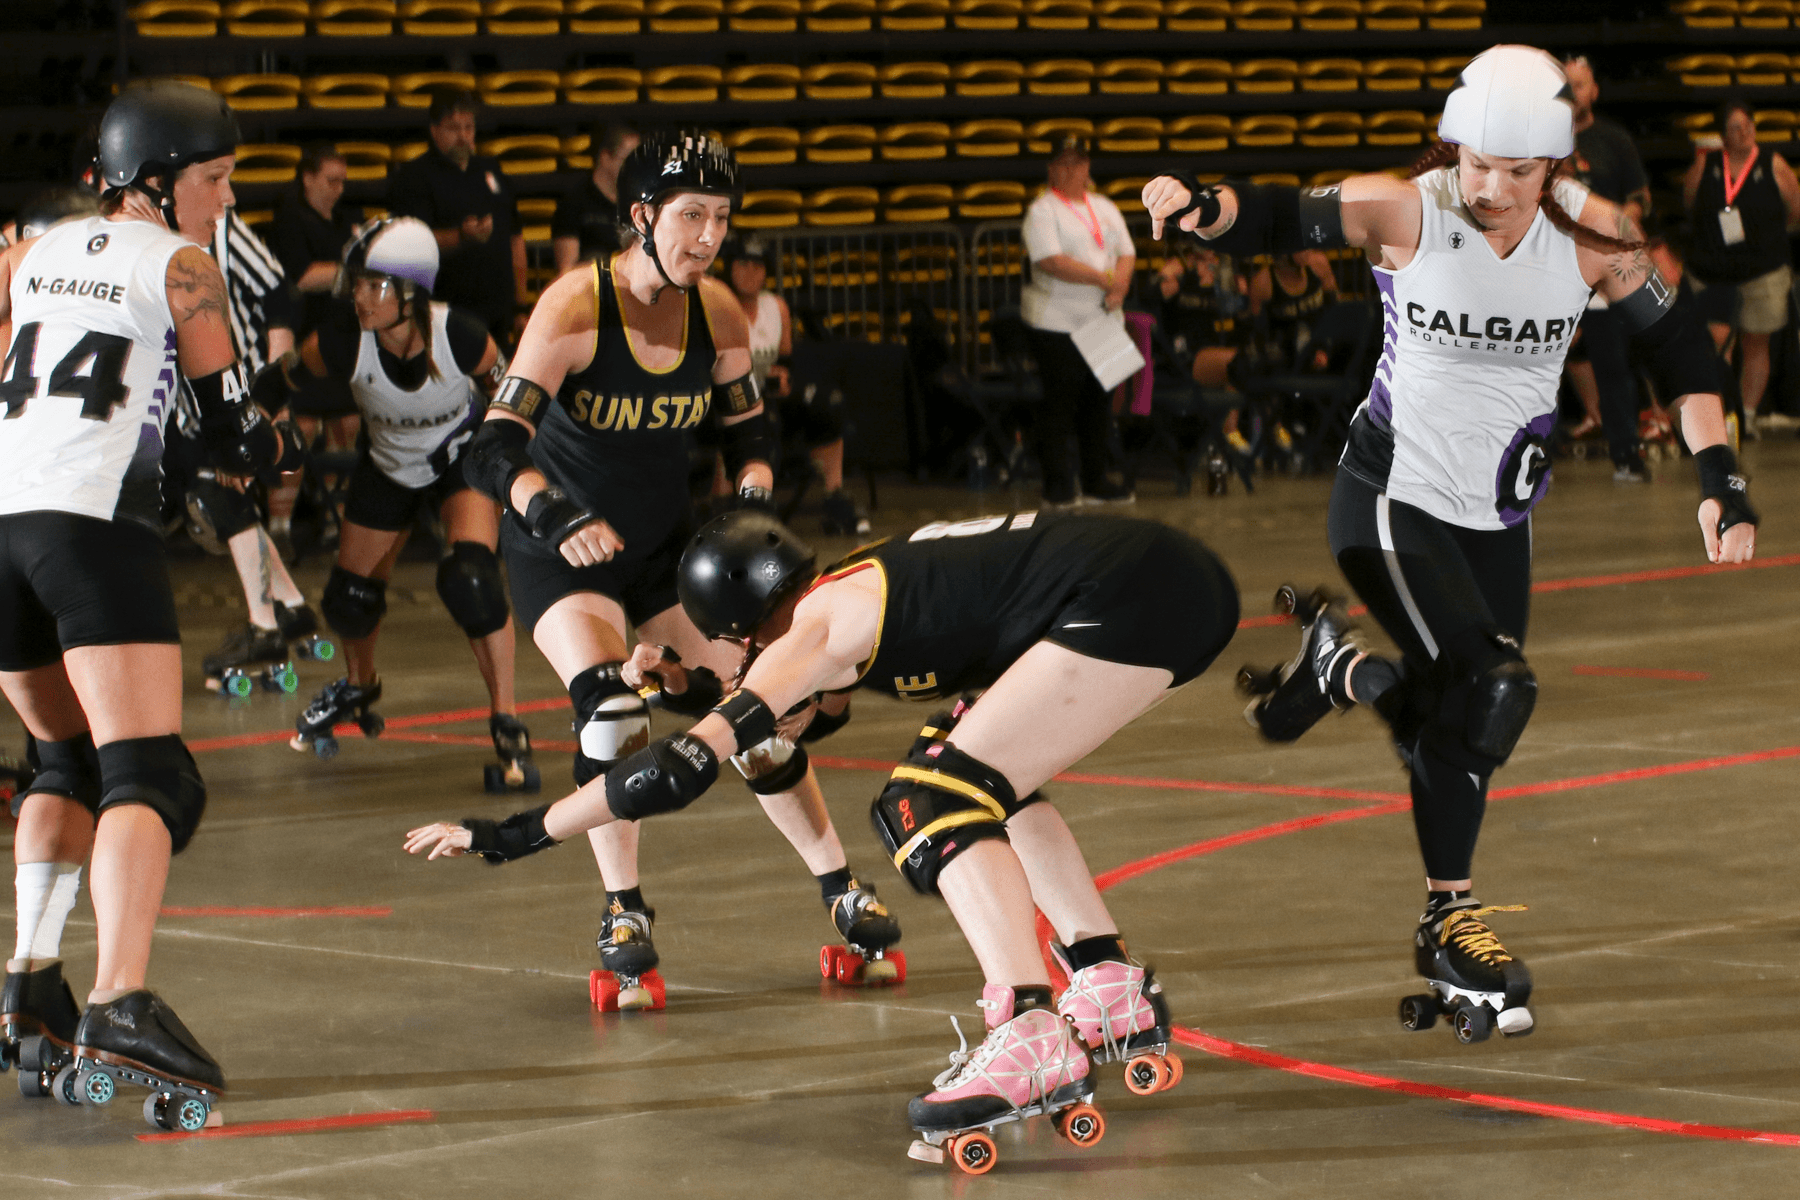 Sun State vs Calgary at the 2019 WFTDA Continental Cup - North America West